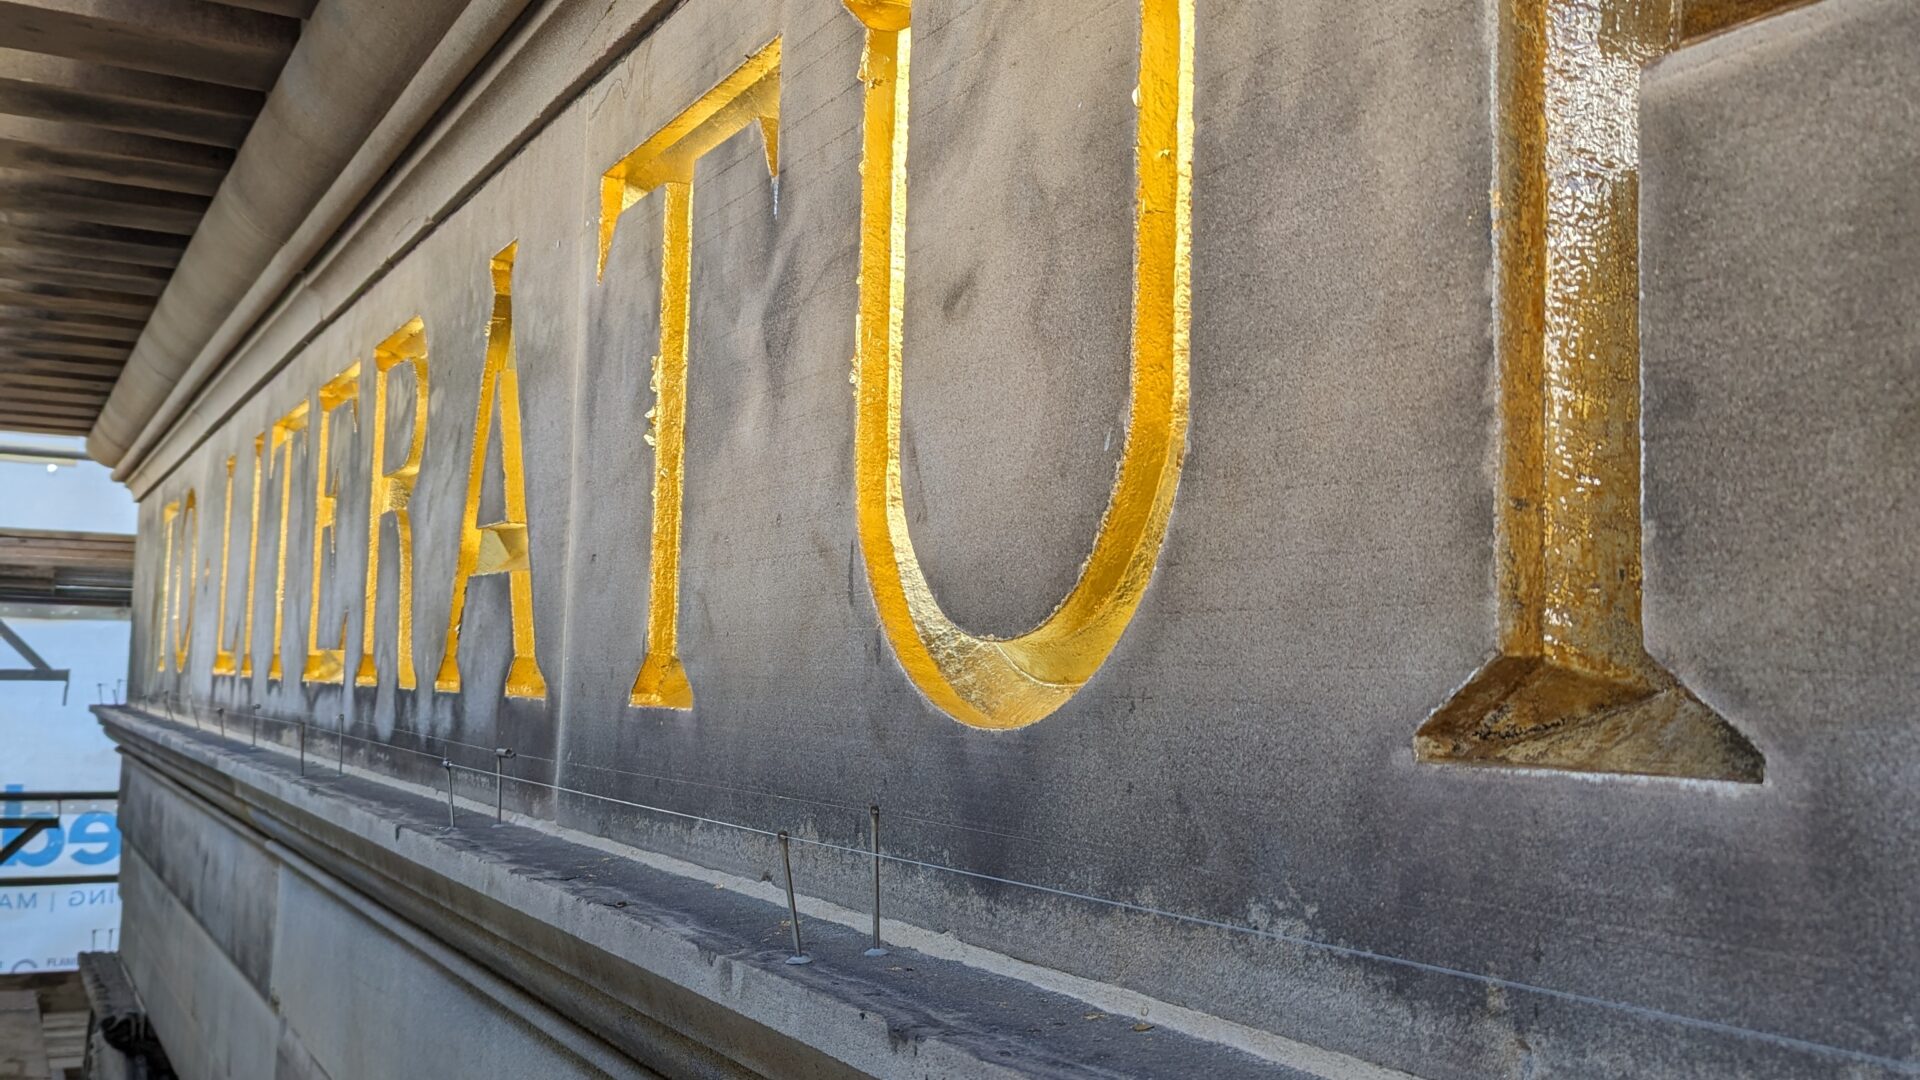 A close up of the gold lettering under the pediment.